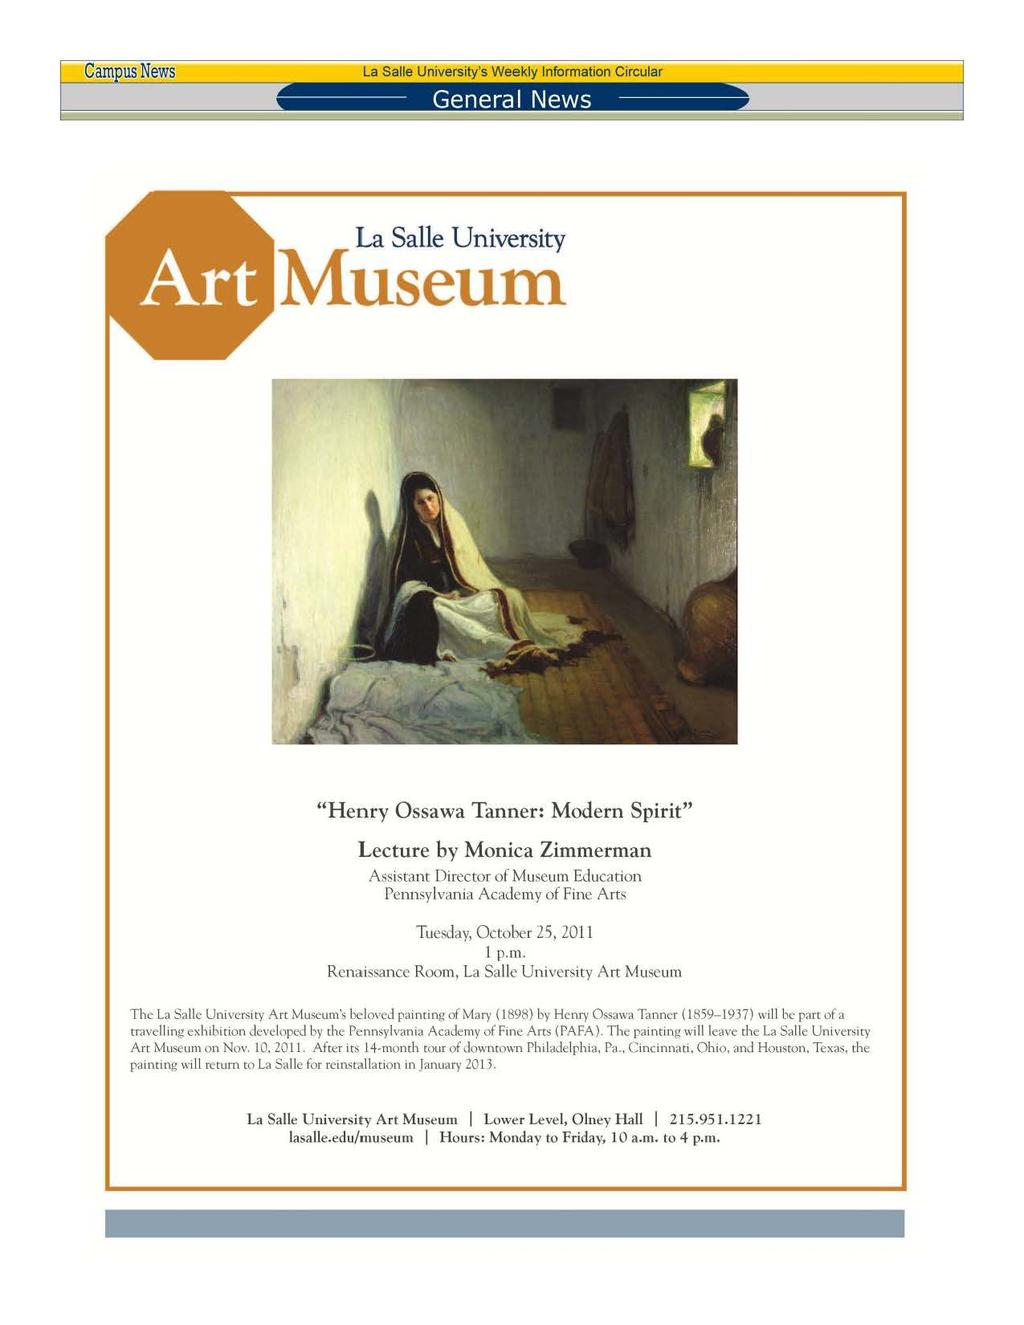 Cam usnews La Salle University's Wee kly Information Circular Genera I News Page 6 La Salle University Museum "Henry Ossawa Tanner: Modern Spirit" Lecture by Monica Zimmerman Assistant Director of